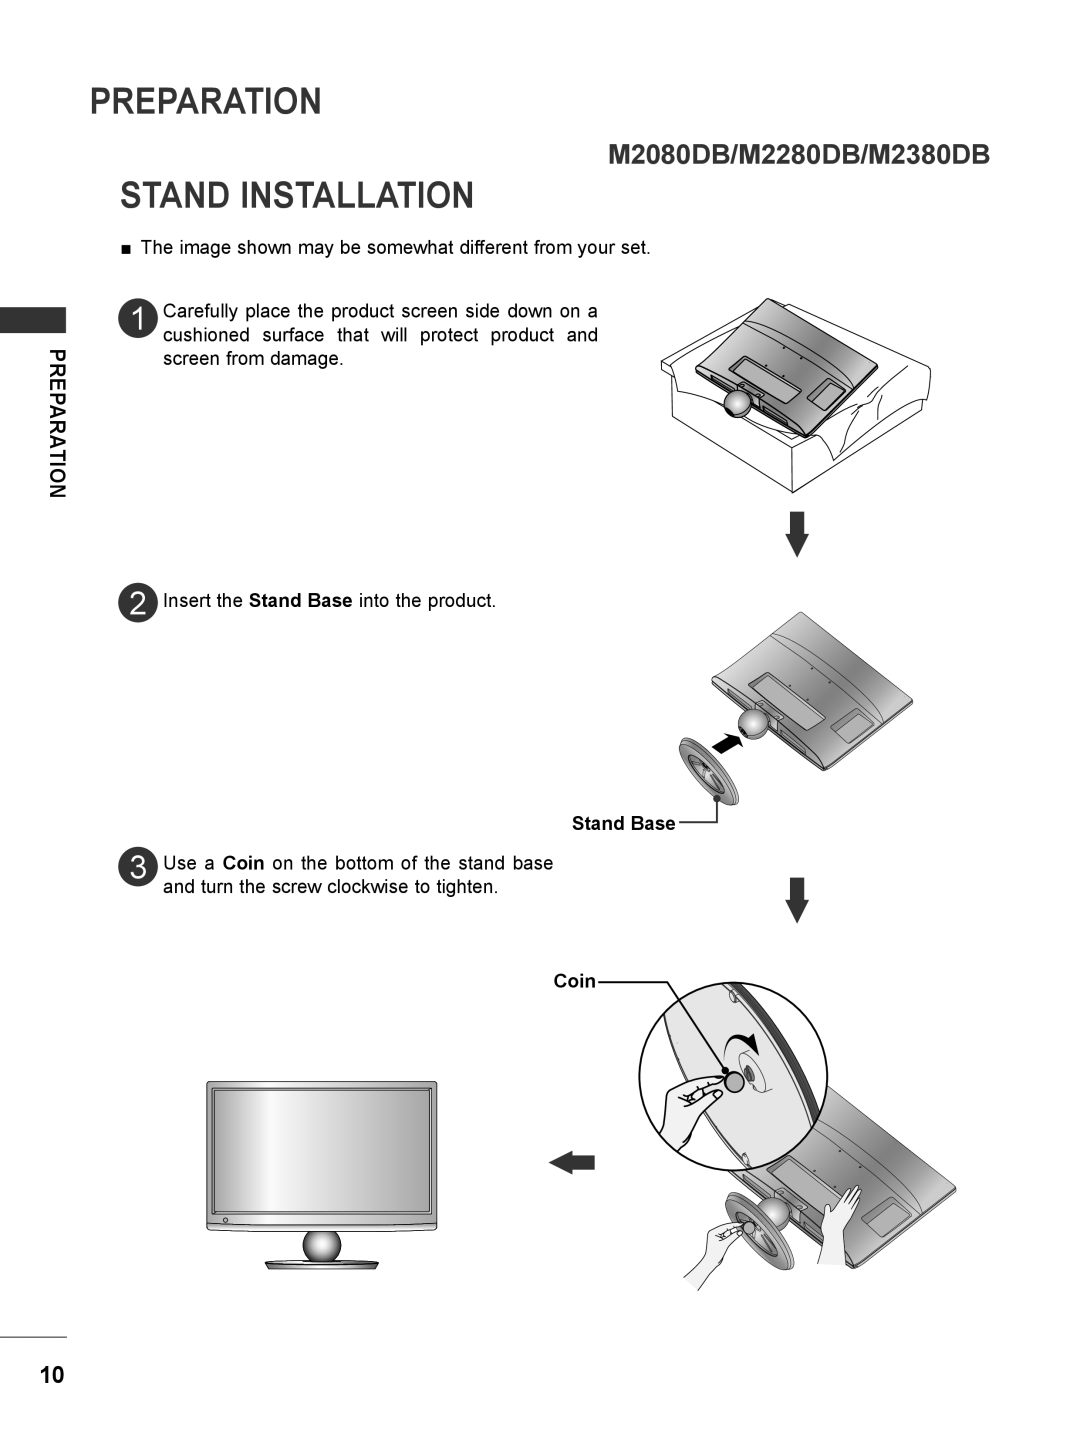 LG Electronics M2080DF, M2780DF, M2780DN, M2380DN M2080DB/M2280DB/M2380DB, Preparation, Stand Installation, Stand Base, Coin 